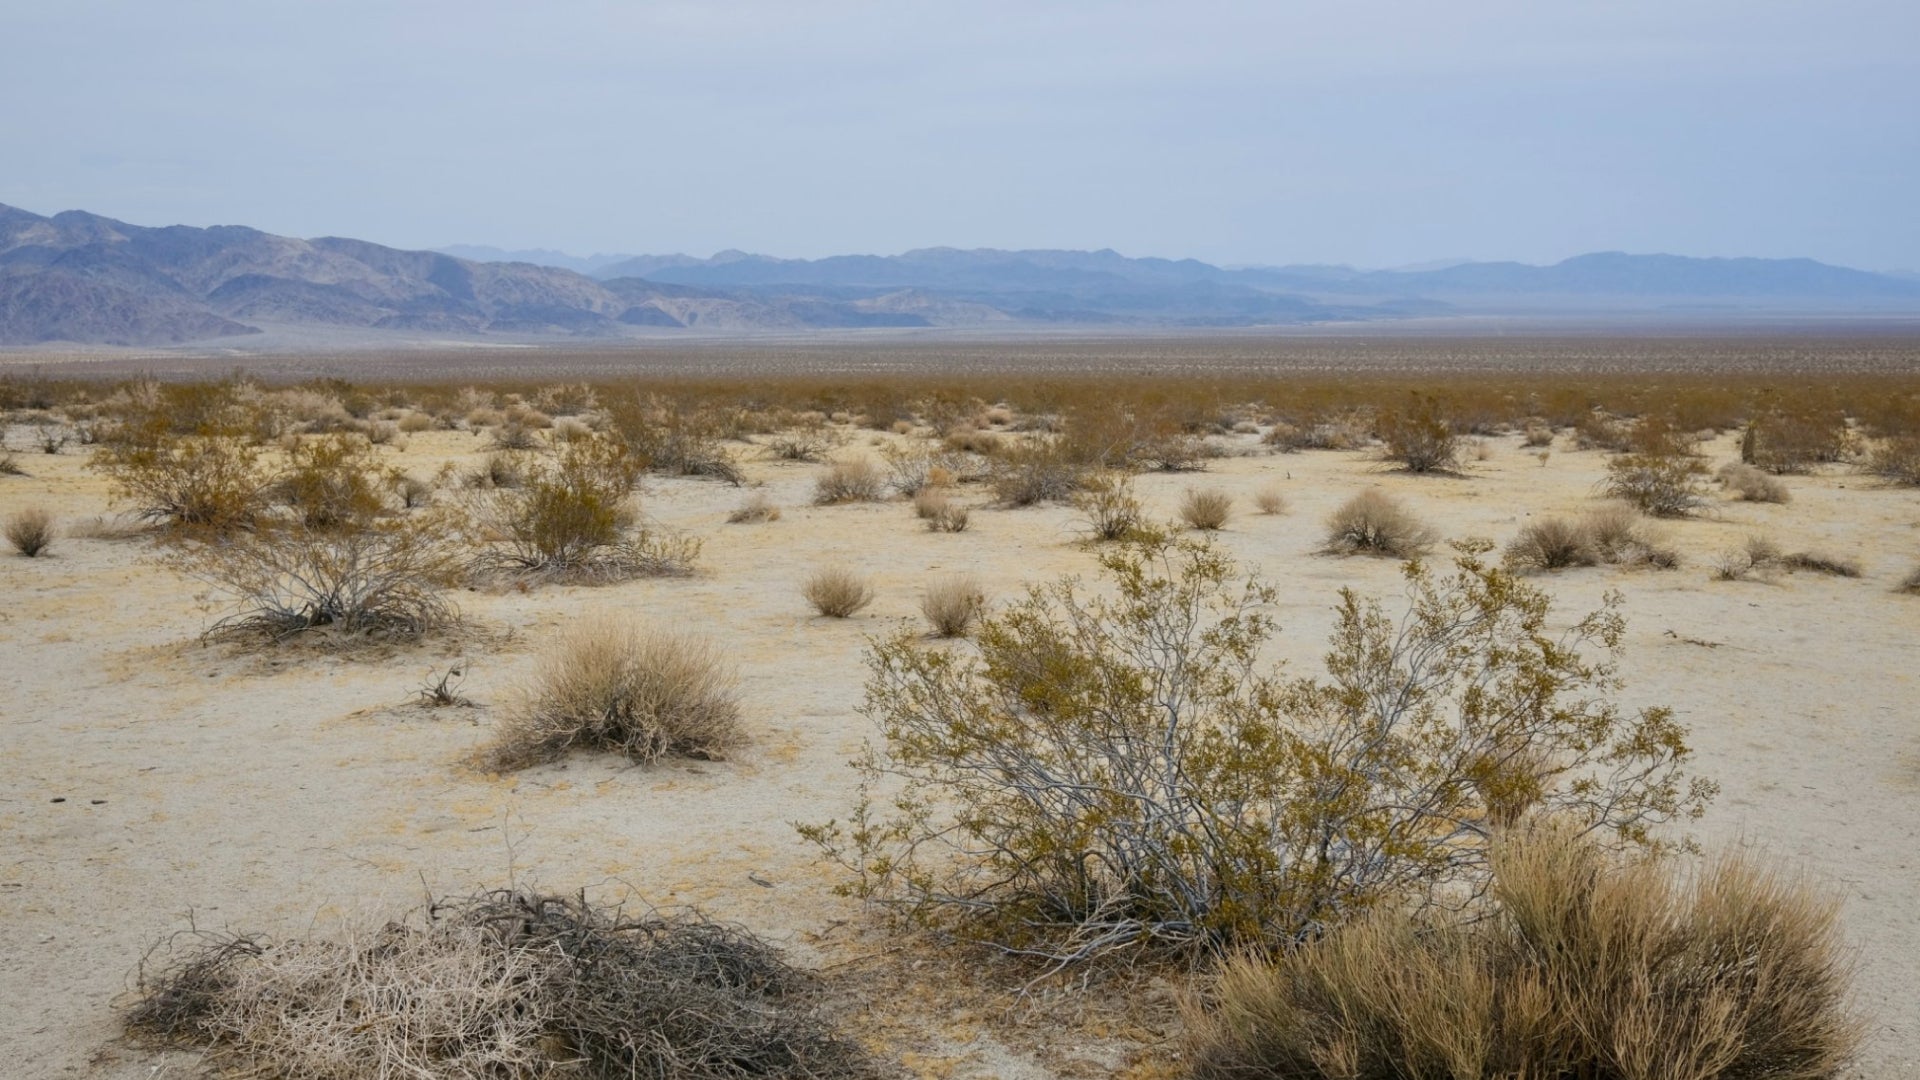 Sunfair Lakebed.  Sand and small scrub brush in foreground.  Mountains in background.